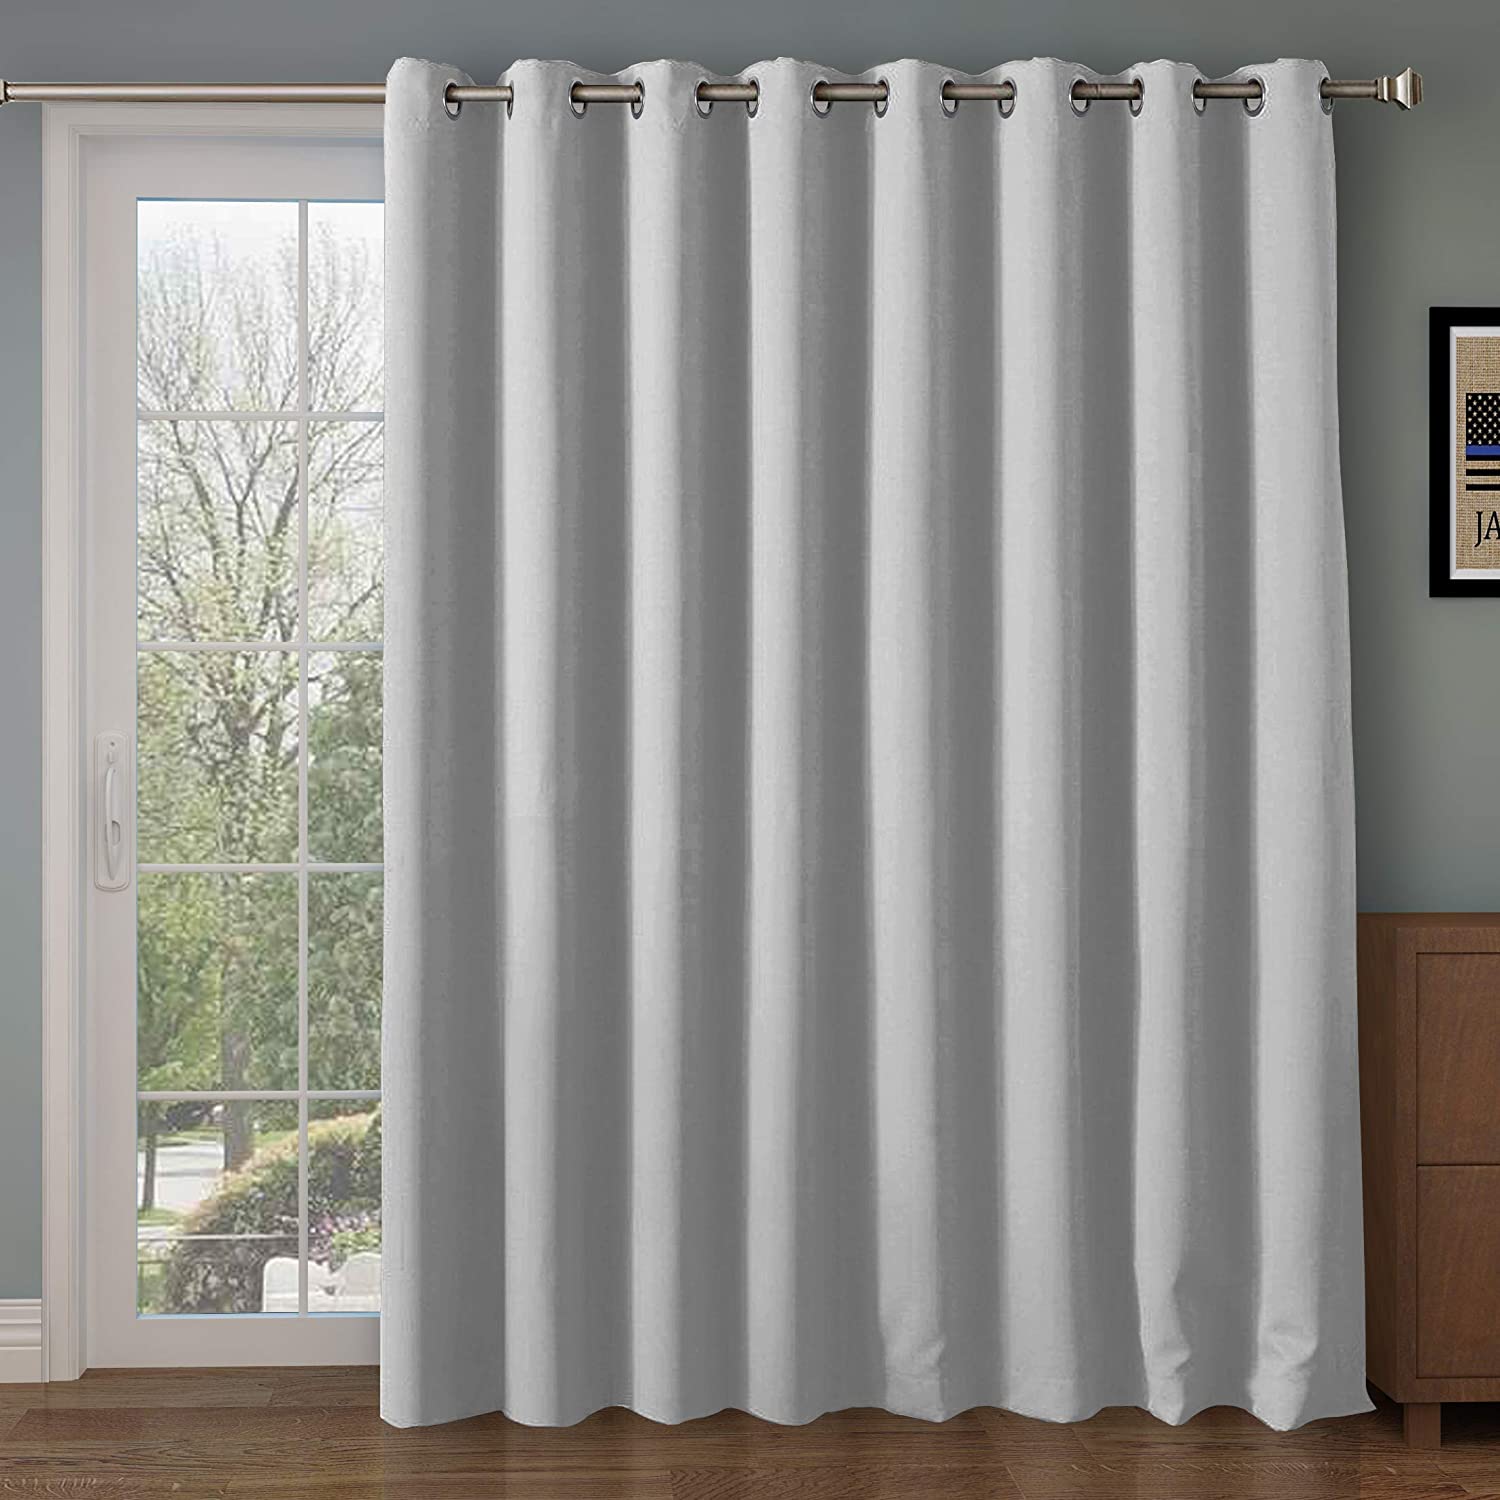 No one Rose Home Fashion RHF Privacy Room Divider Curtain 8 ft Wide x 7ft Tall 